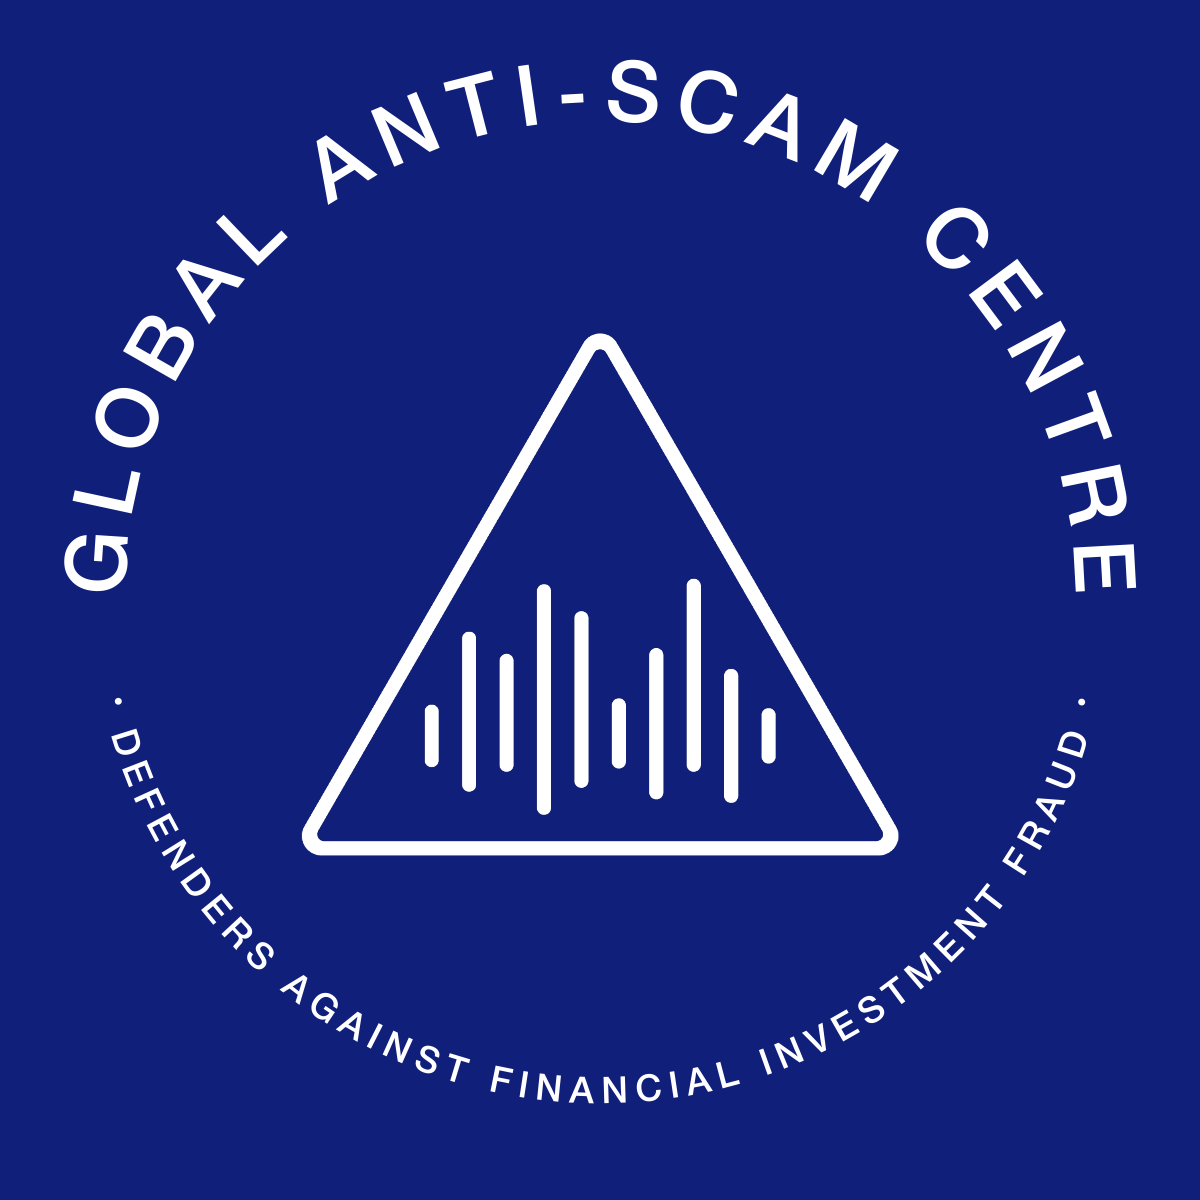 Images Global Anti-Scam Centre